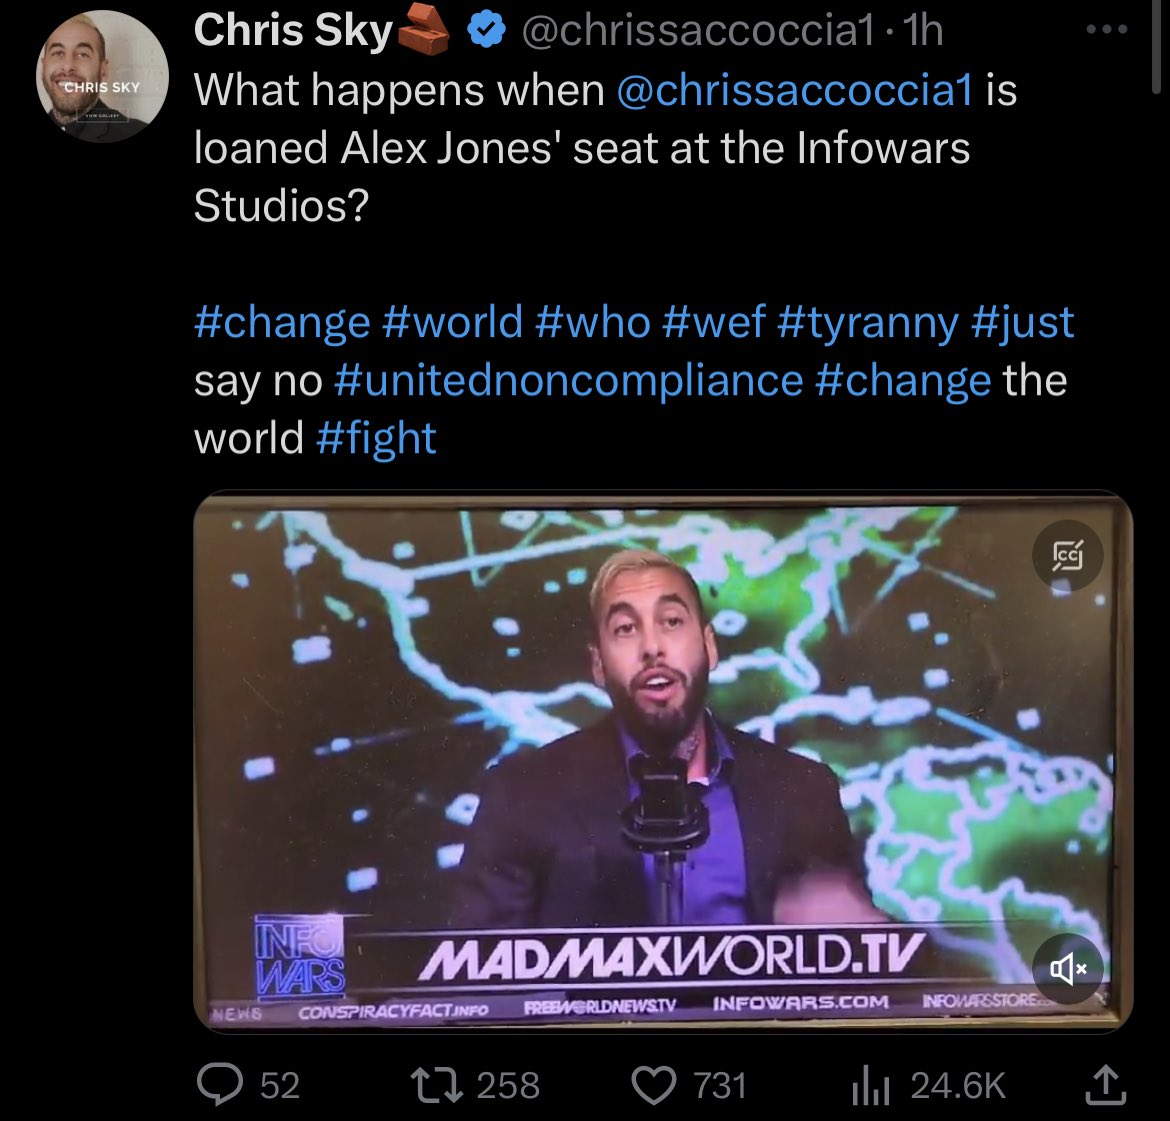 Failed social media influencer, failed toronto mayoral candidate, now he’s setting his sights on the true prize — alex jones’s throne.

Honestly, he deserves it.  #ChrisSkyIsALoser #JustSayNo
#GayFrogs